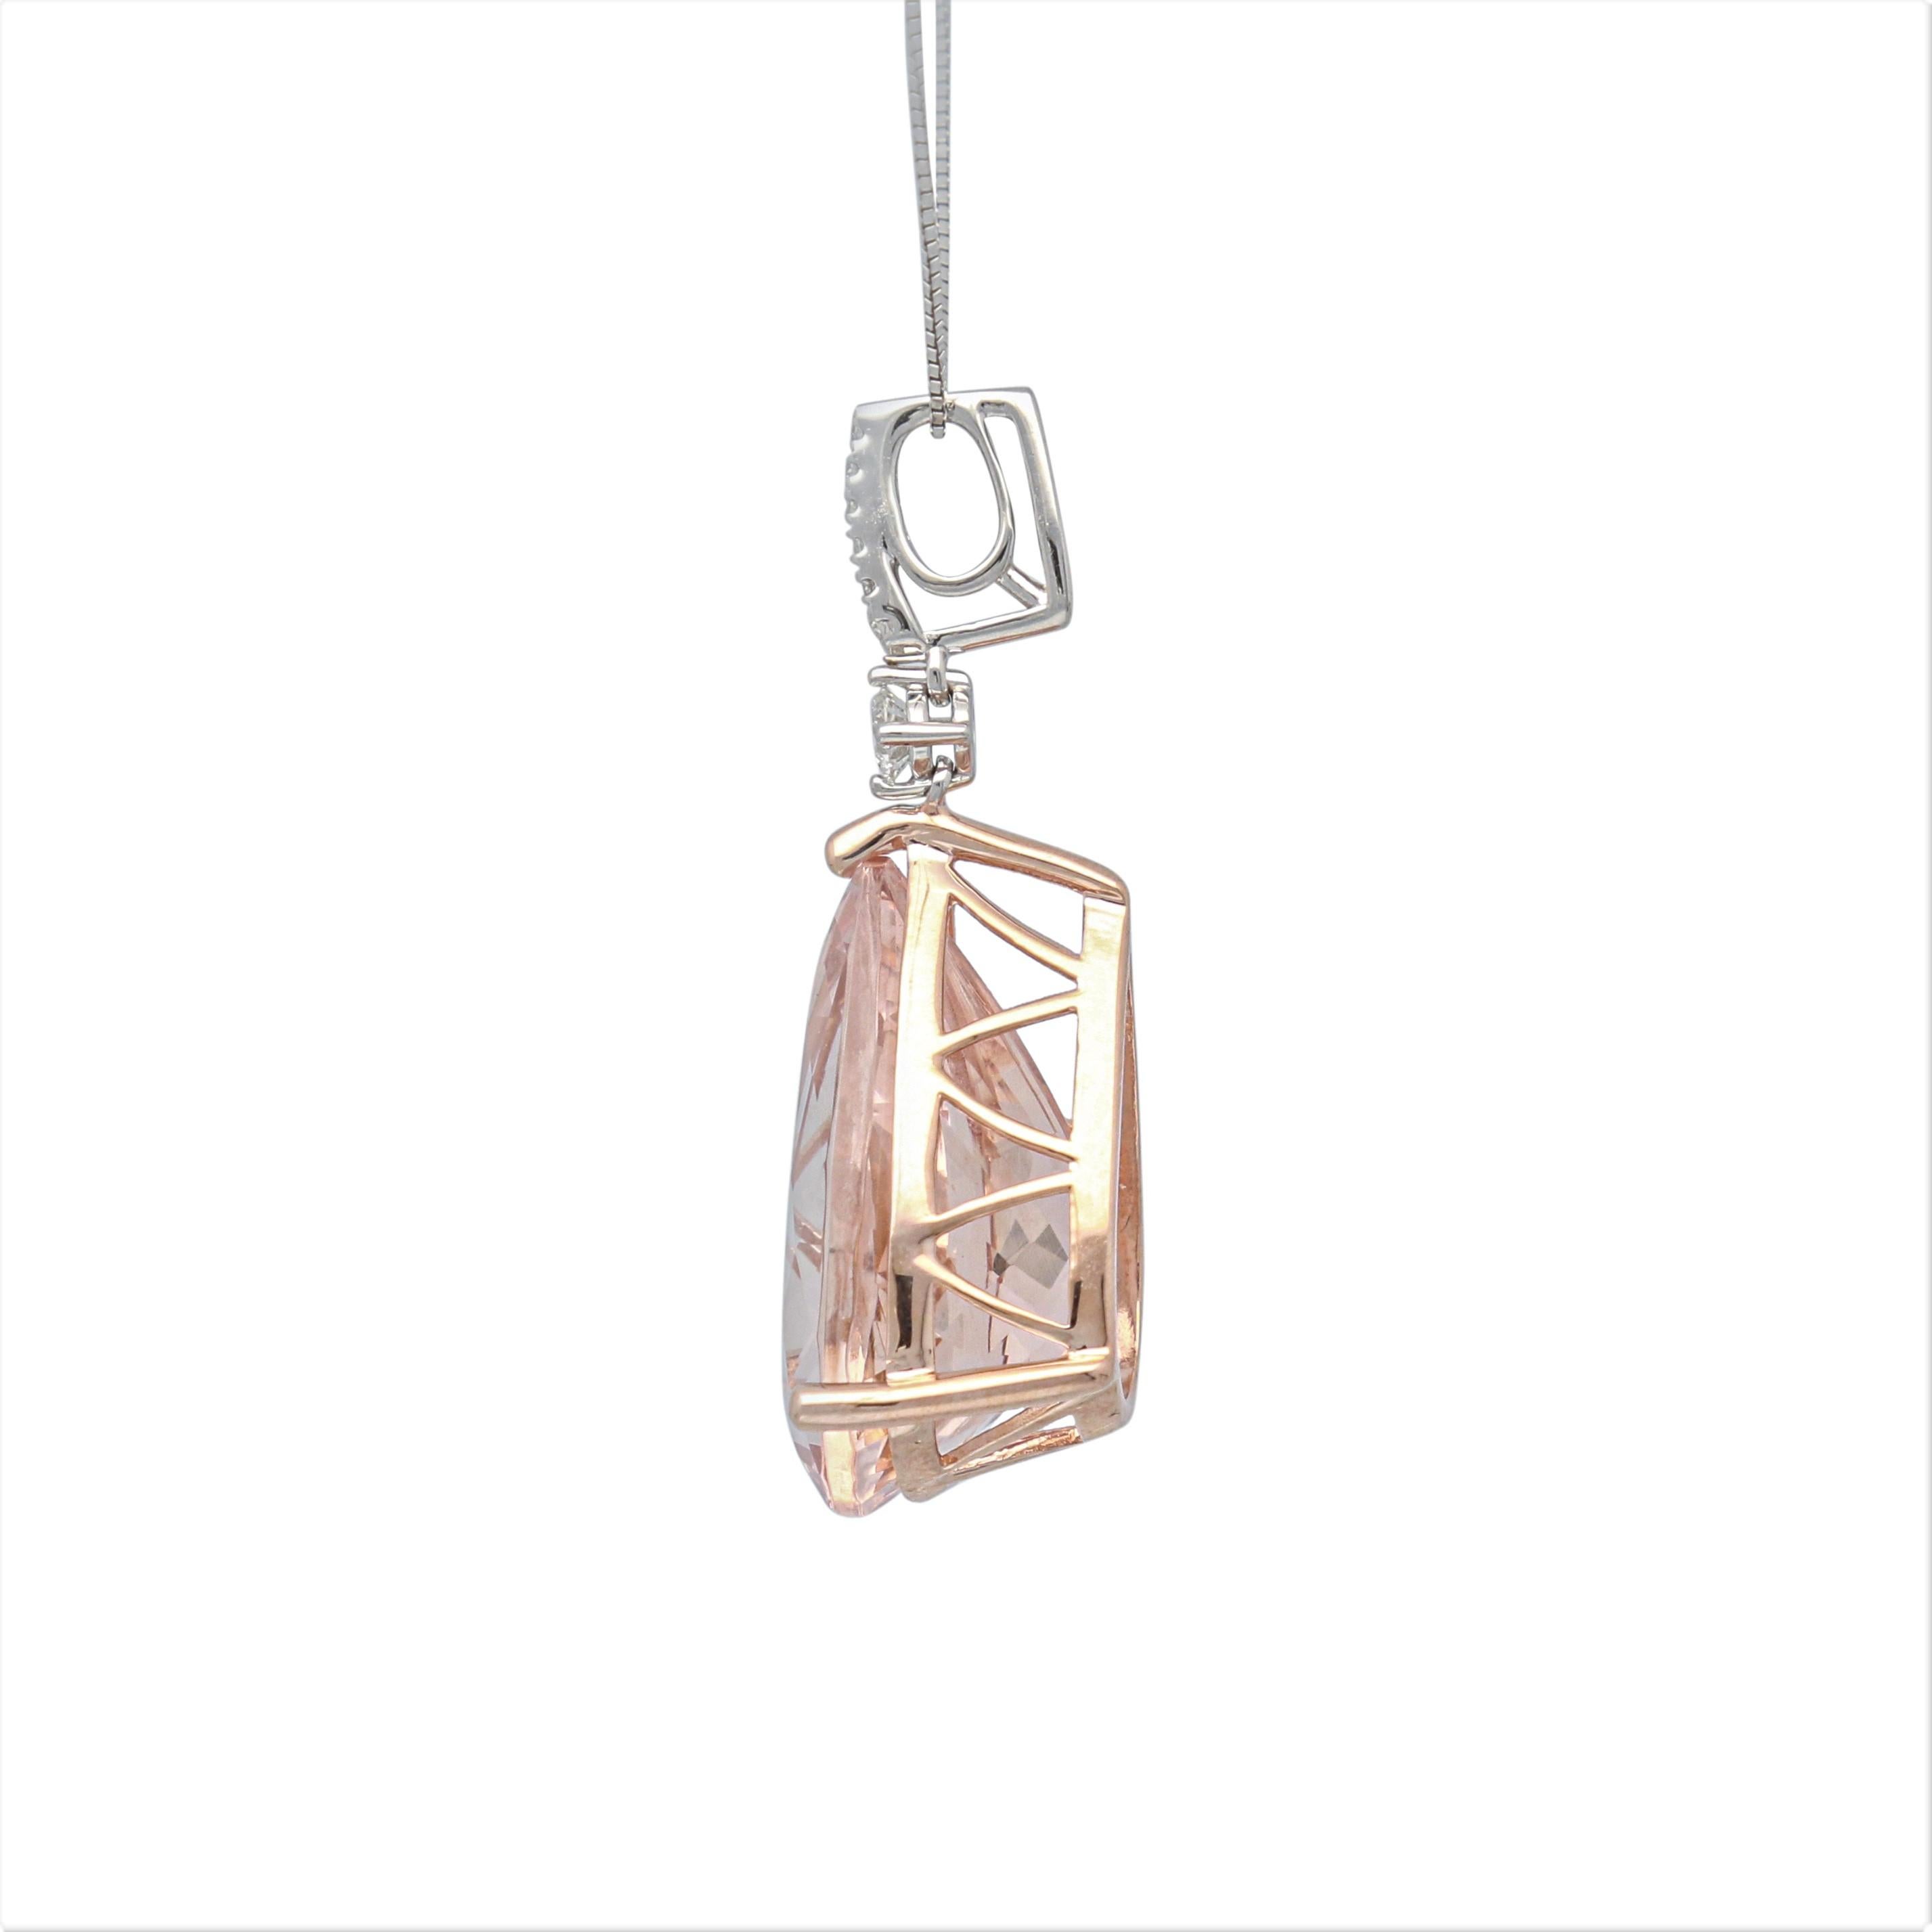 This Gin and Grace Pendant is crafted in 14-karat Two Tone Gold and features a Pear shaped Morganite 13.17 Carat & 7 Round Brilliant cut Diamonds 0.15 Carat. This necklace comes with 18